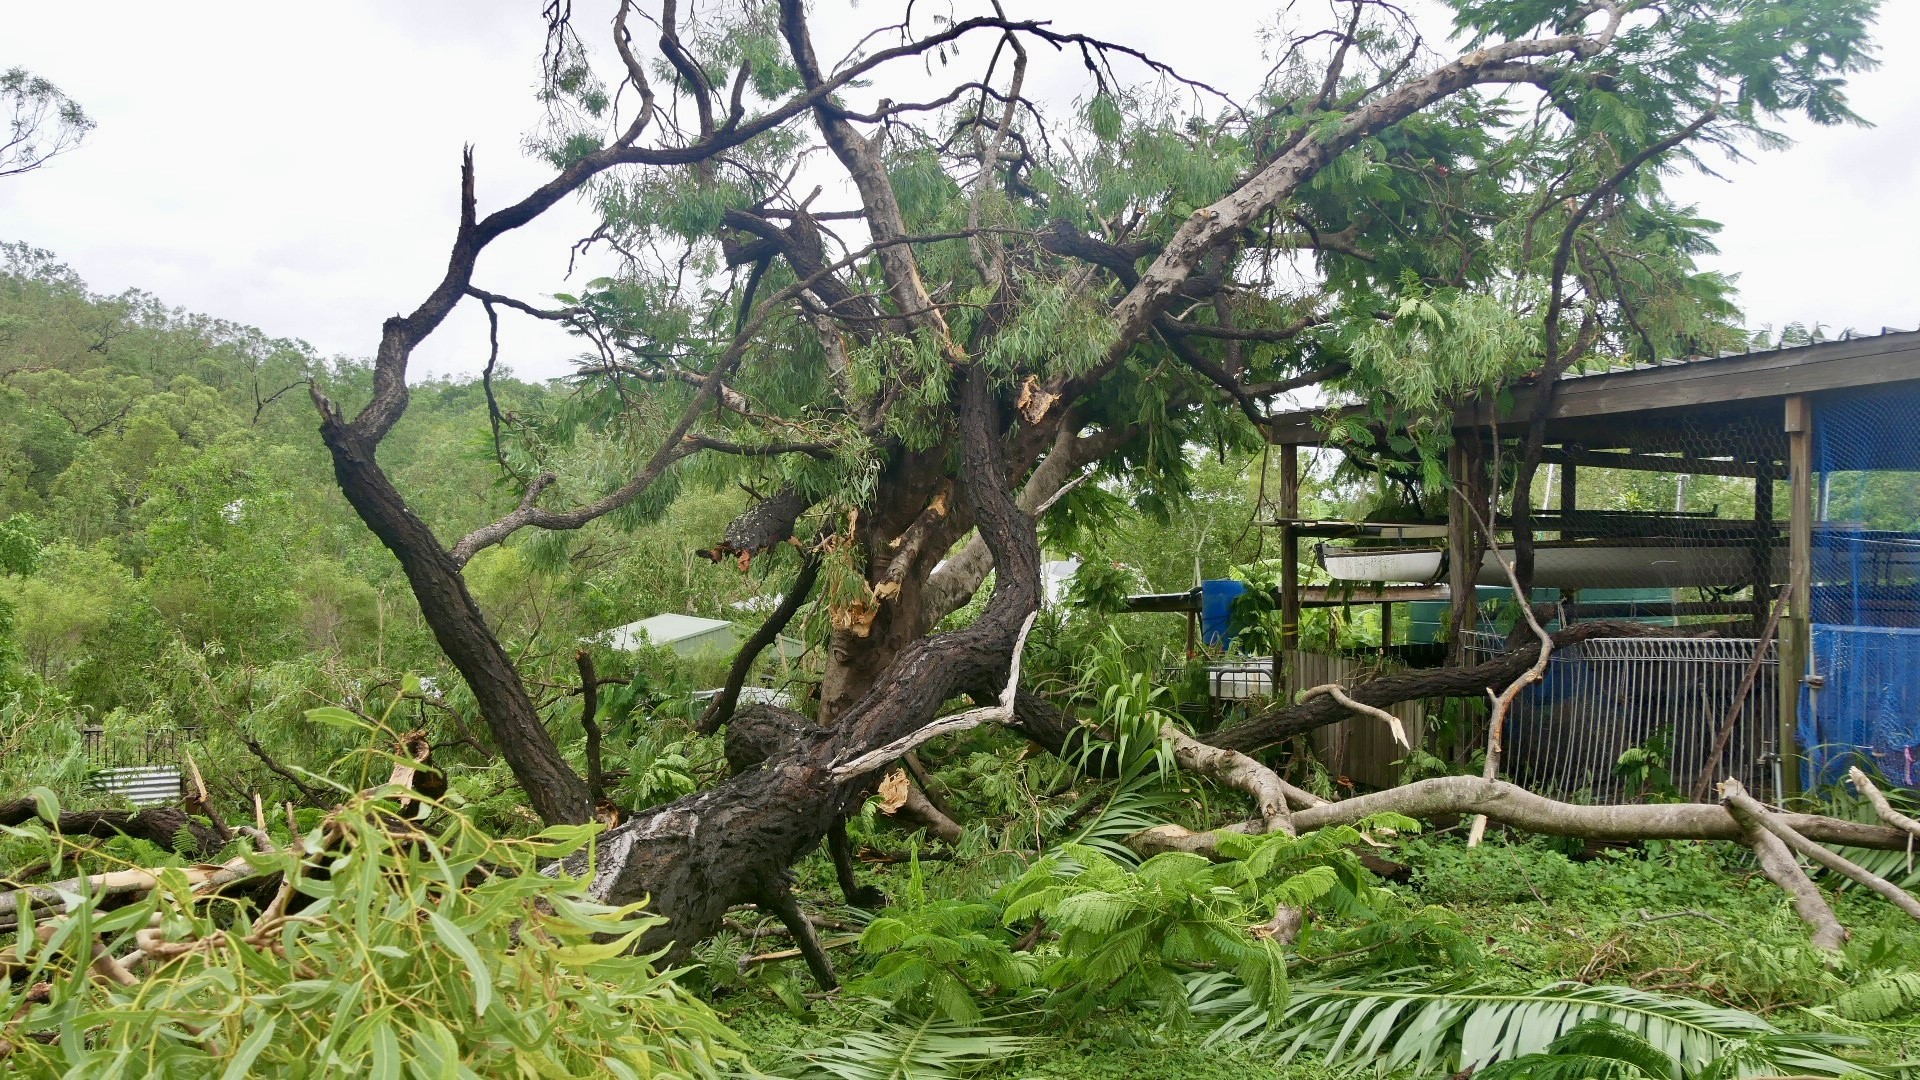 a large tree that has fallen on a house